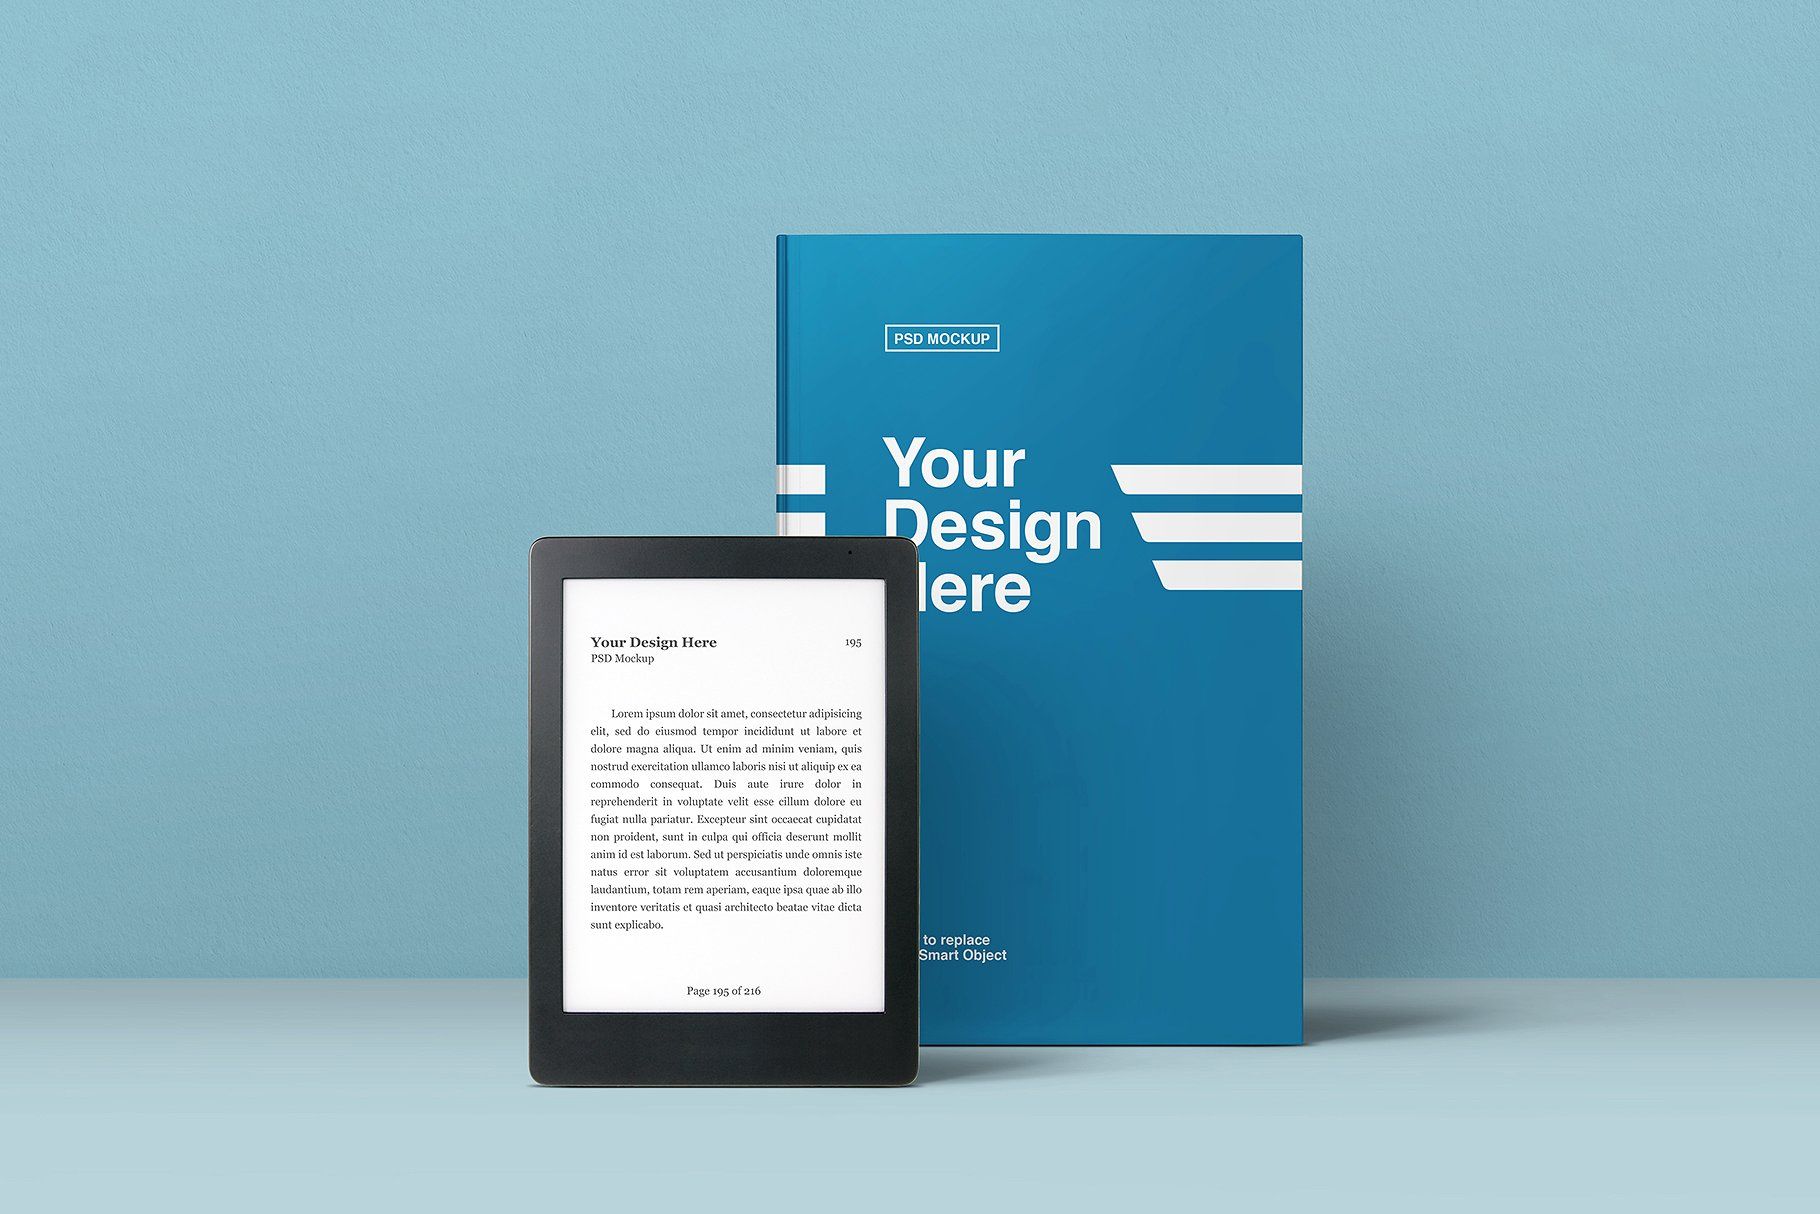 A modern e-book mockup displayed next to a traditional printed book with matching cover designs, set against a soft blue background, showcasing a blend of traditional and digital reading formats.